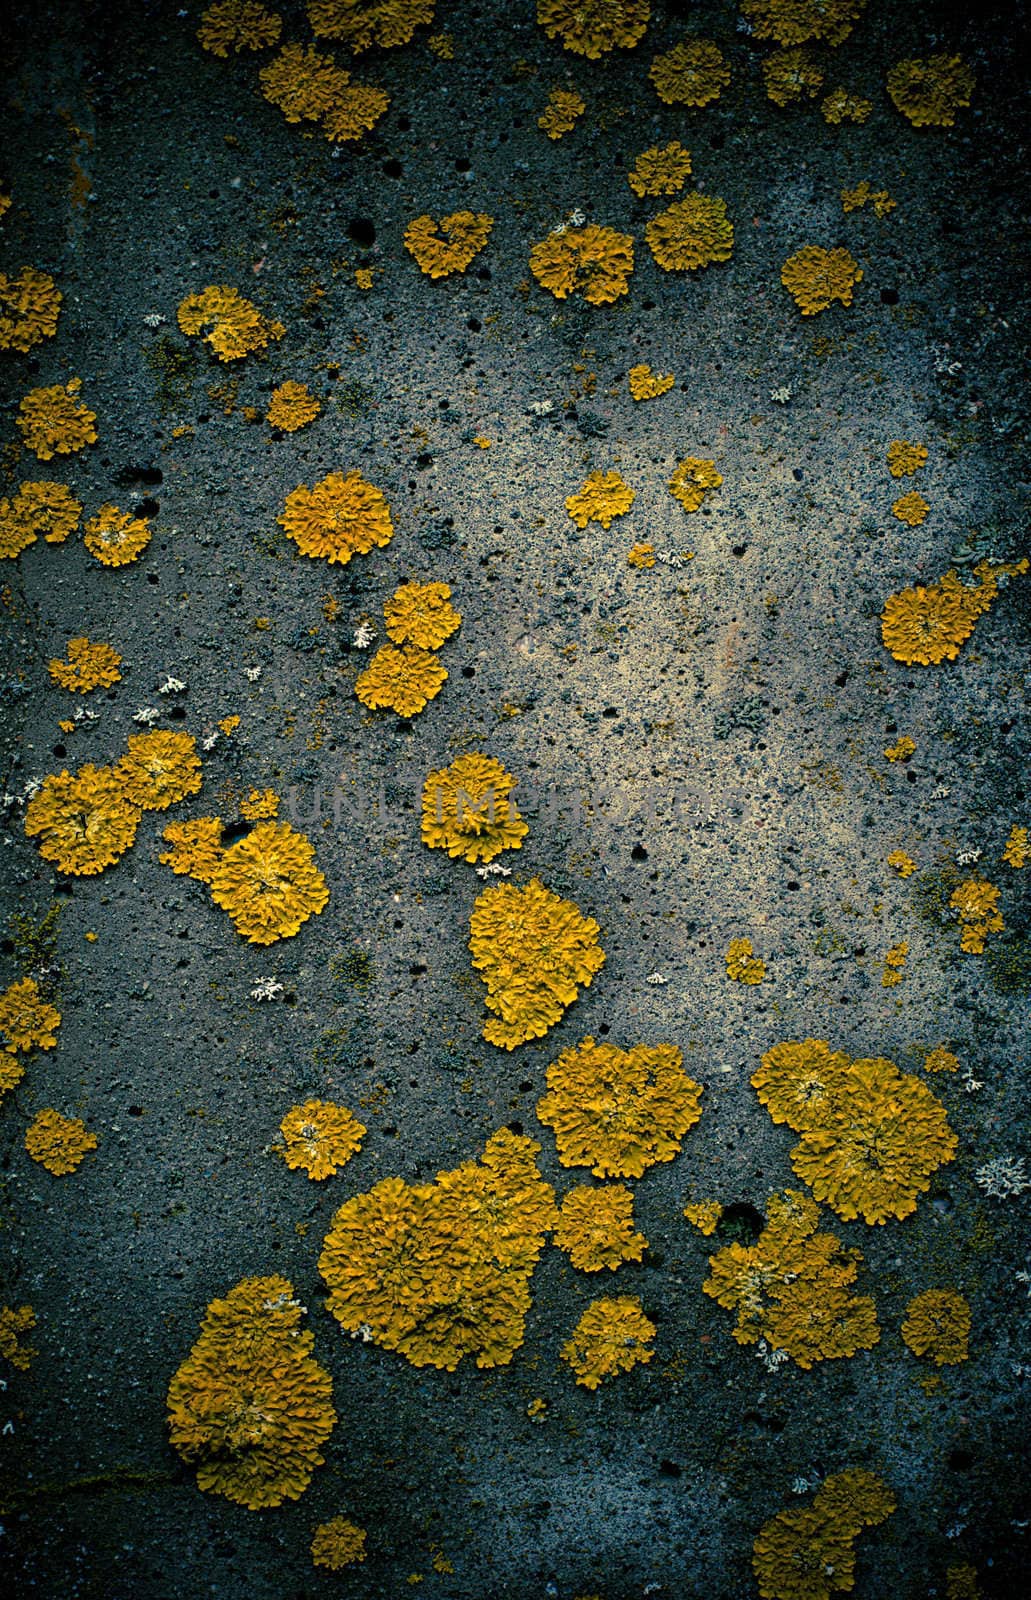 Wall detail with yellow  lichen pieces